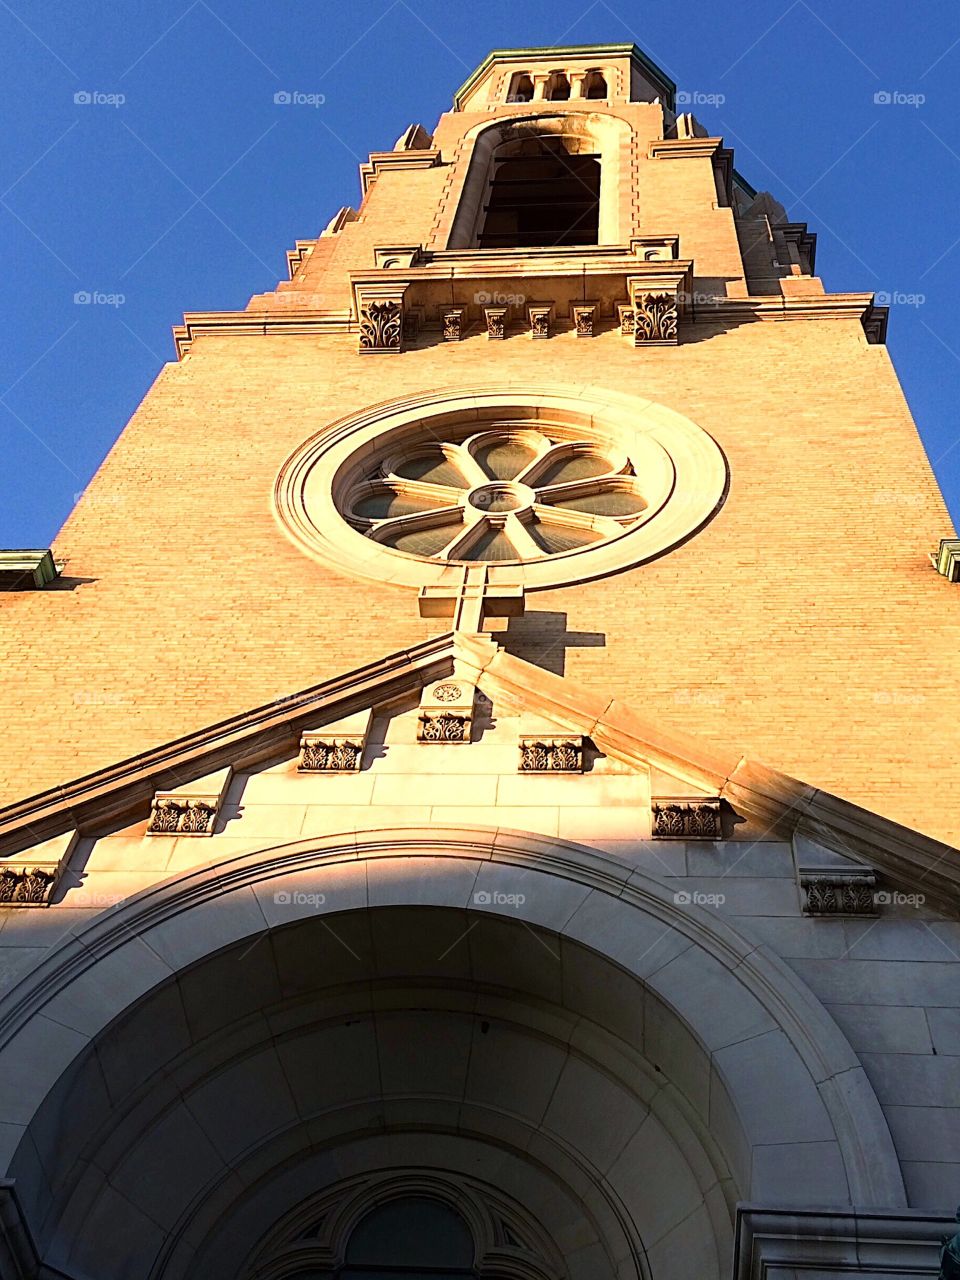 Looking up to the steeple 